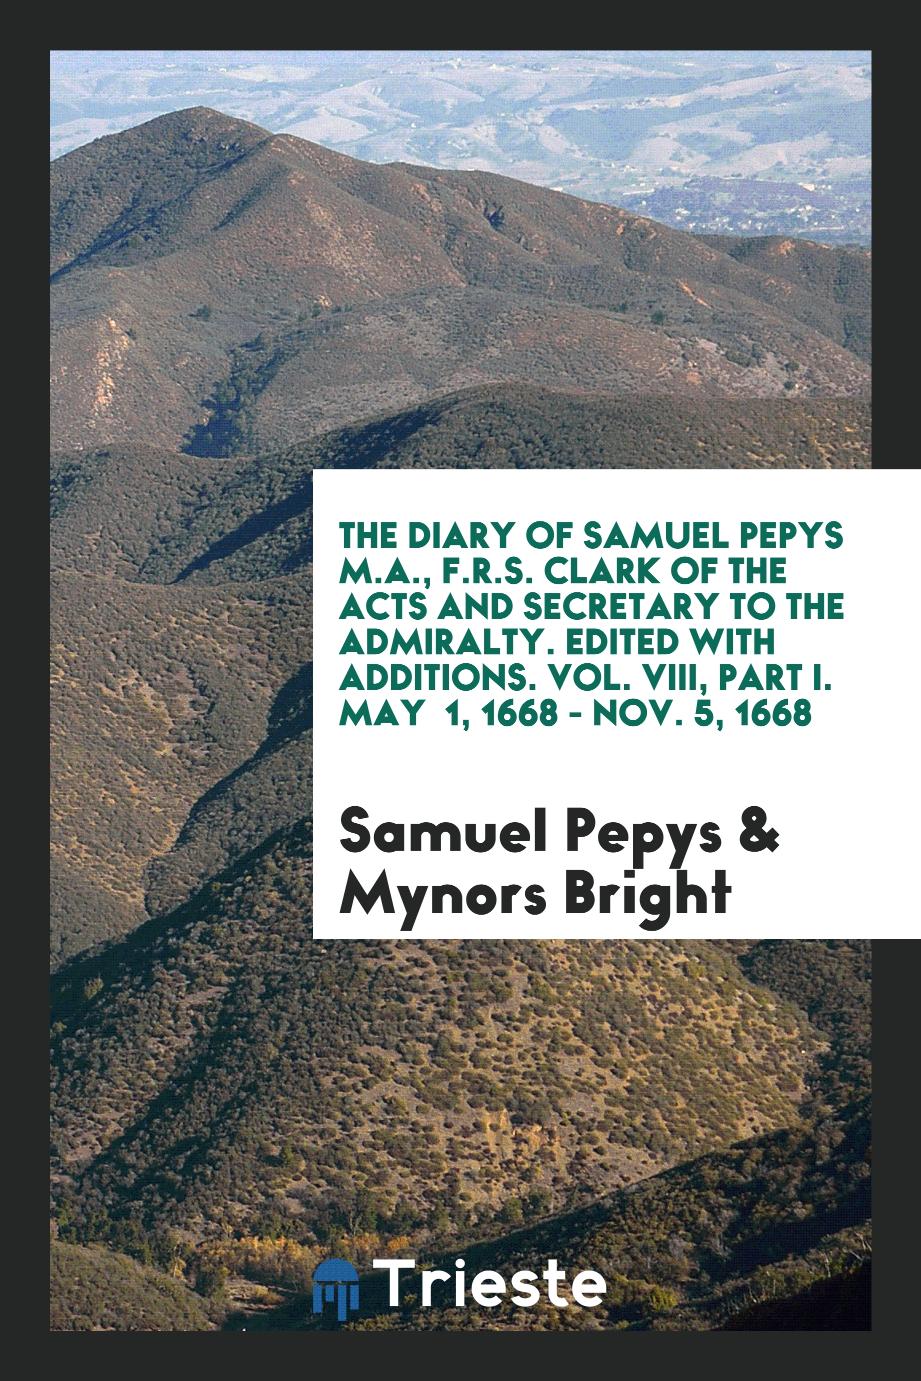 The Diary of Samuel Pepys M.A., F.R.S. Clark of the Acts and Secretary to the Admiralty. Edited with Additions. Vol. VIII, Part I. May 1, 1668 - Nov. 5, 1668